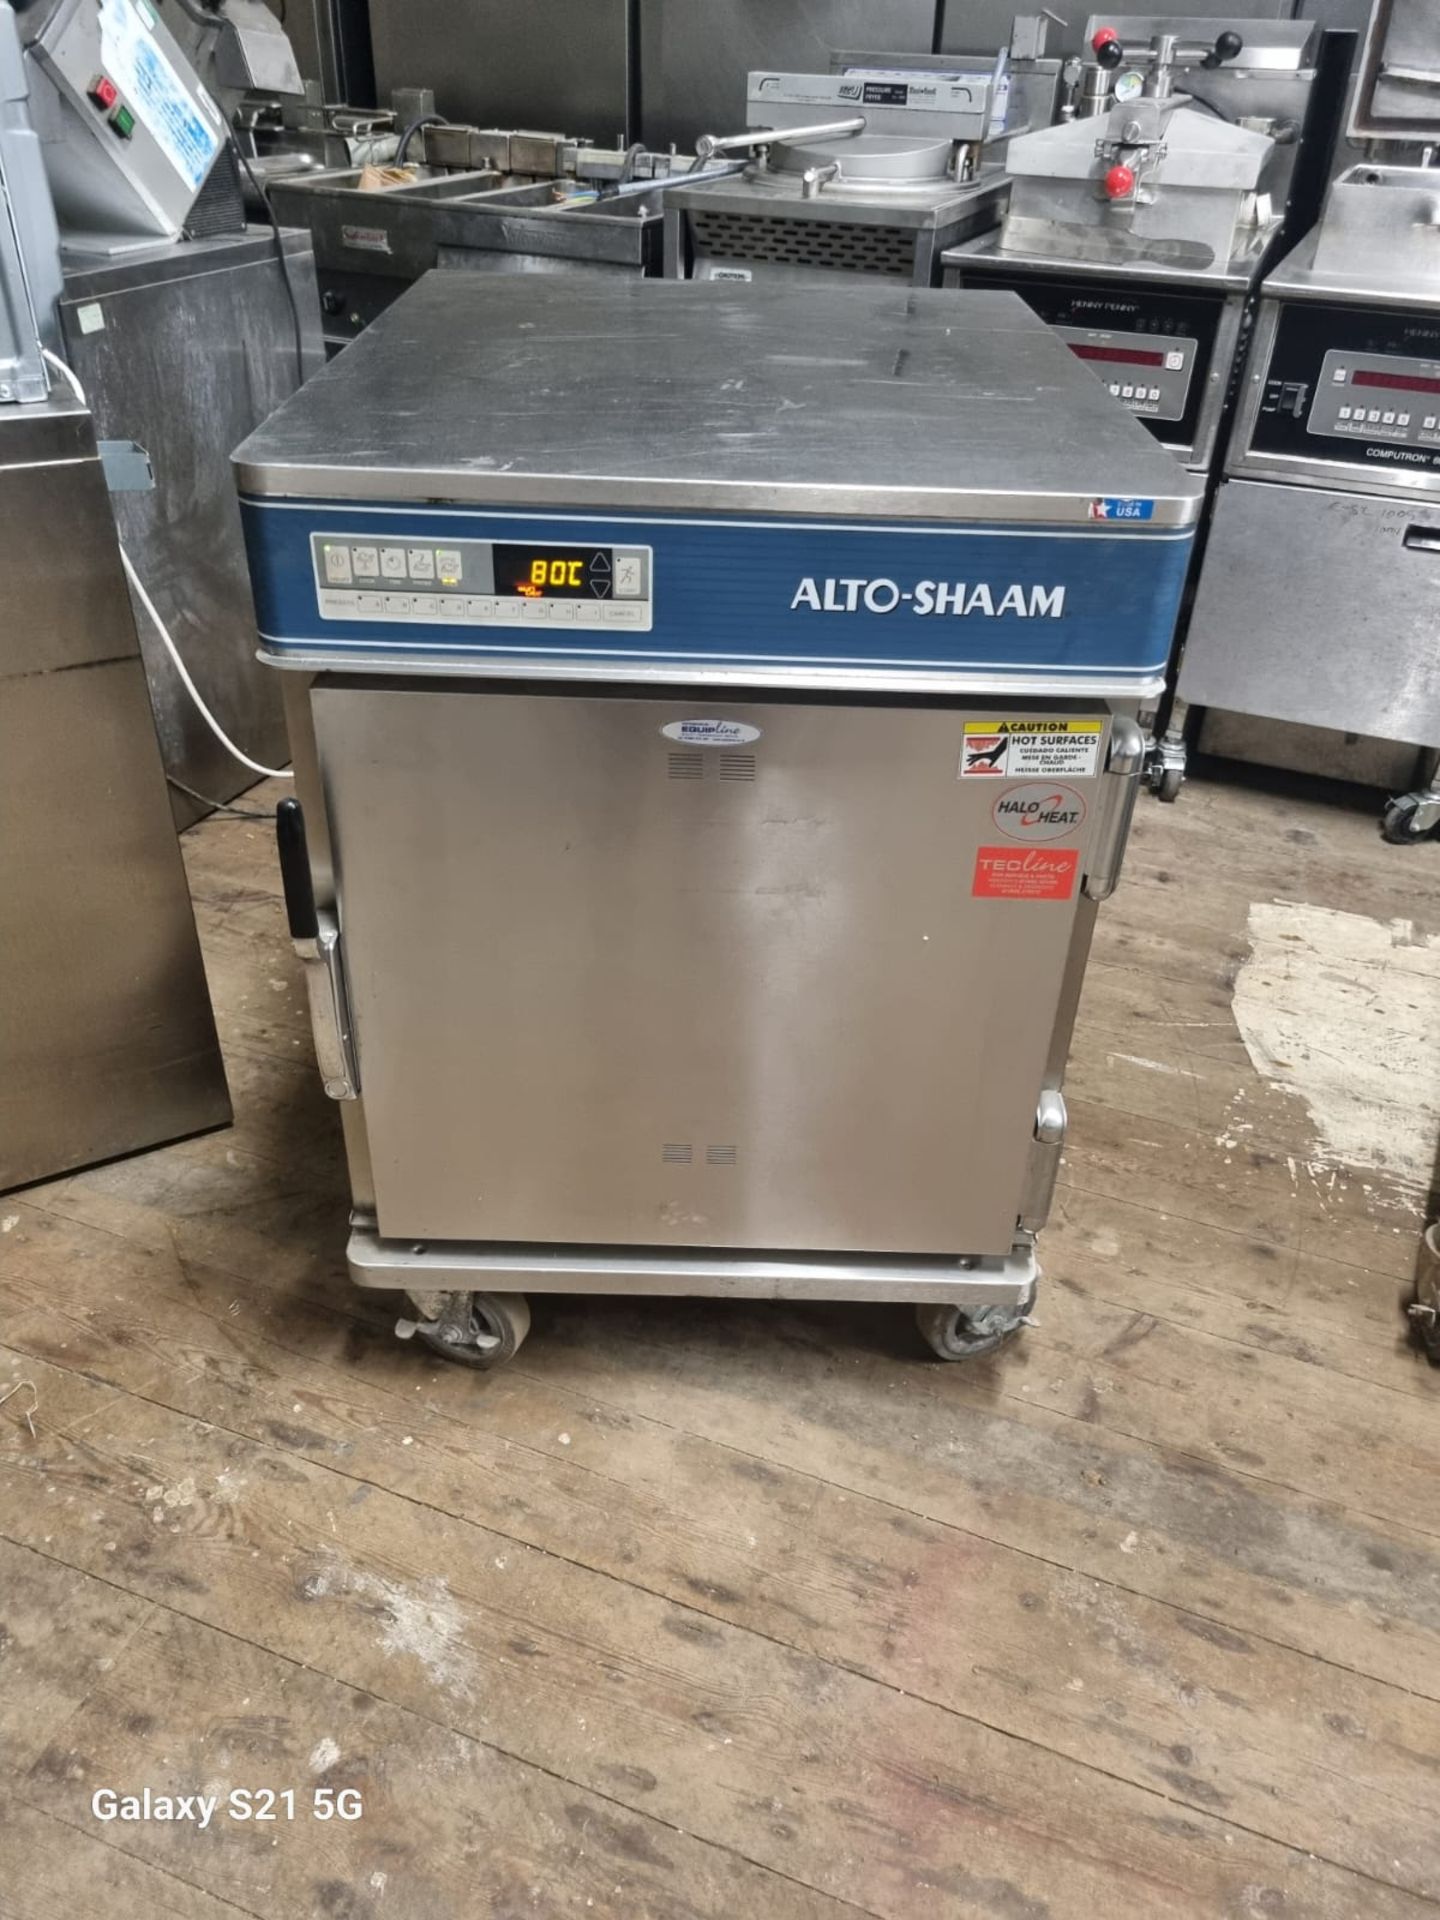 ALTO SHAAM 750-TH-Iii COOK AND HOLD - NEVER BEEN USED - 13 AMP PLUG 